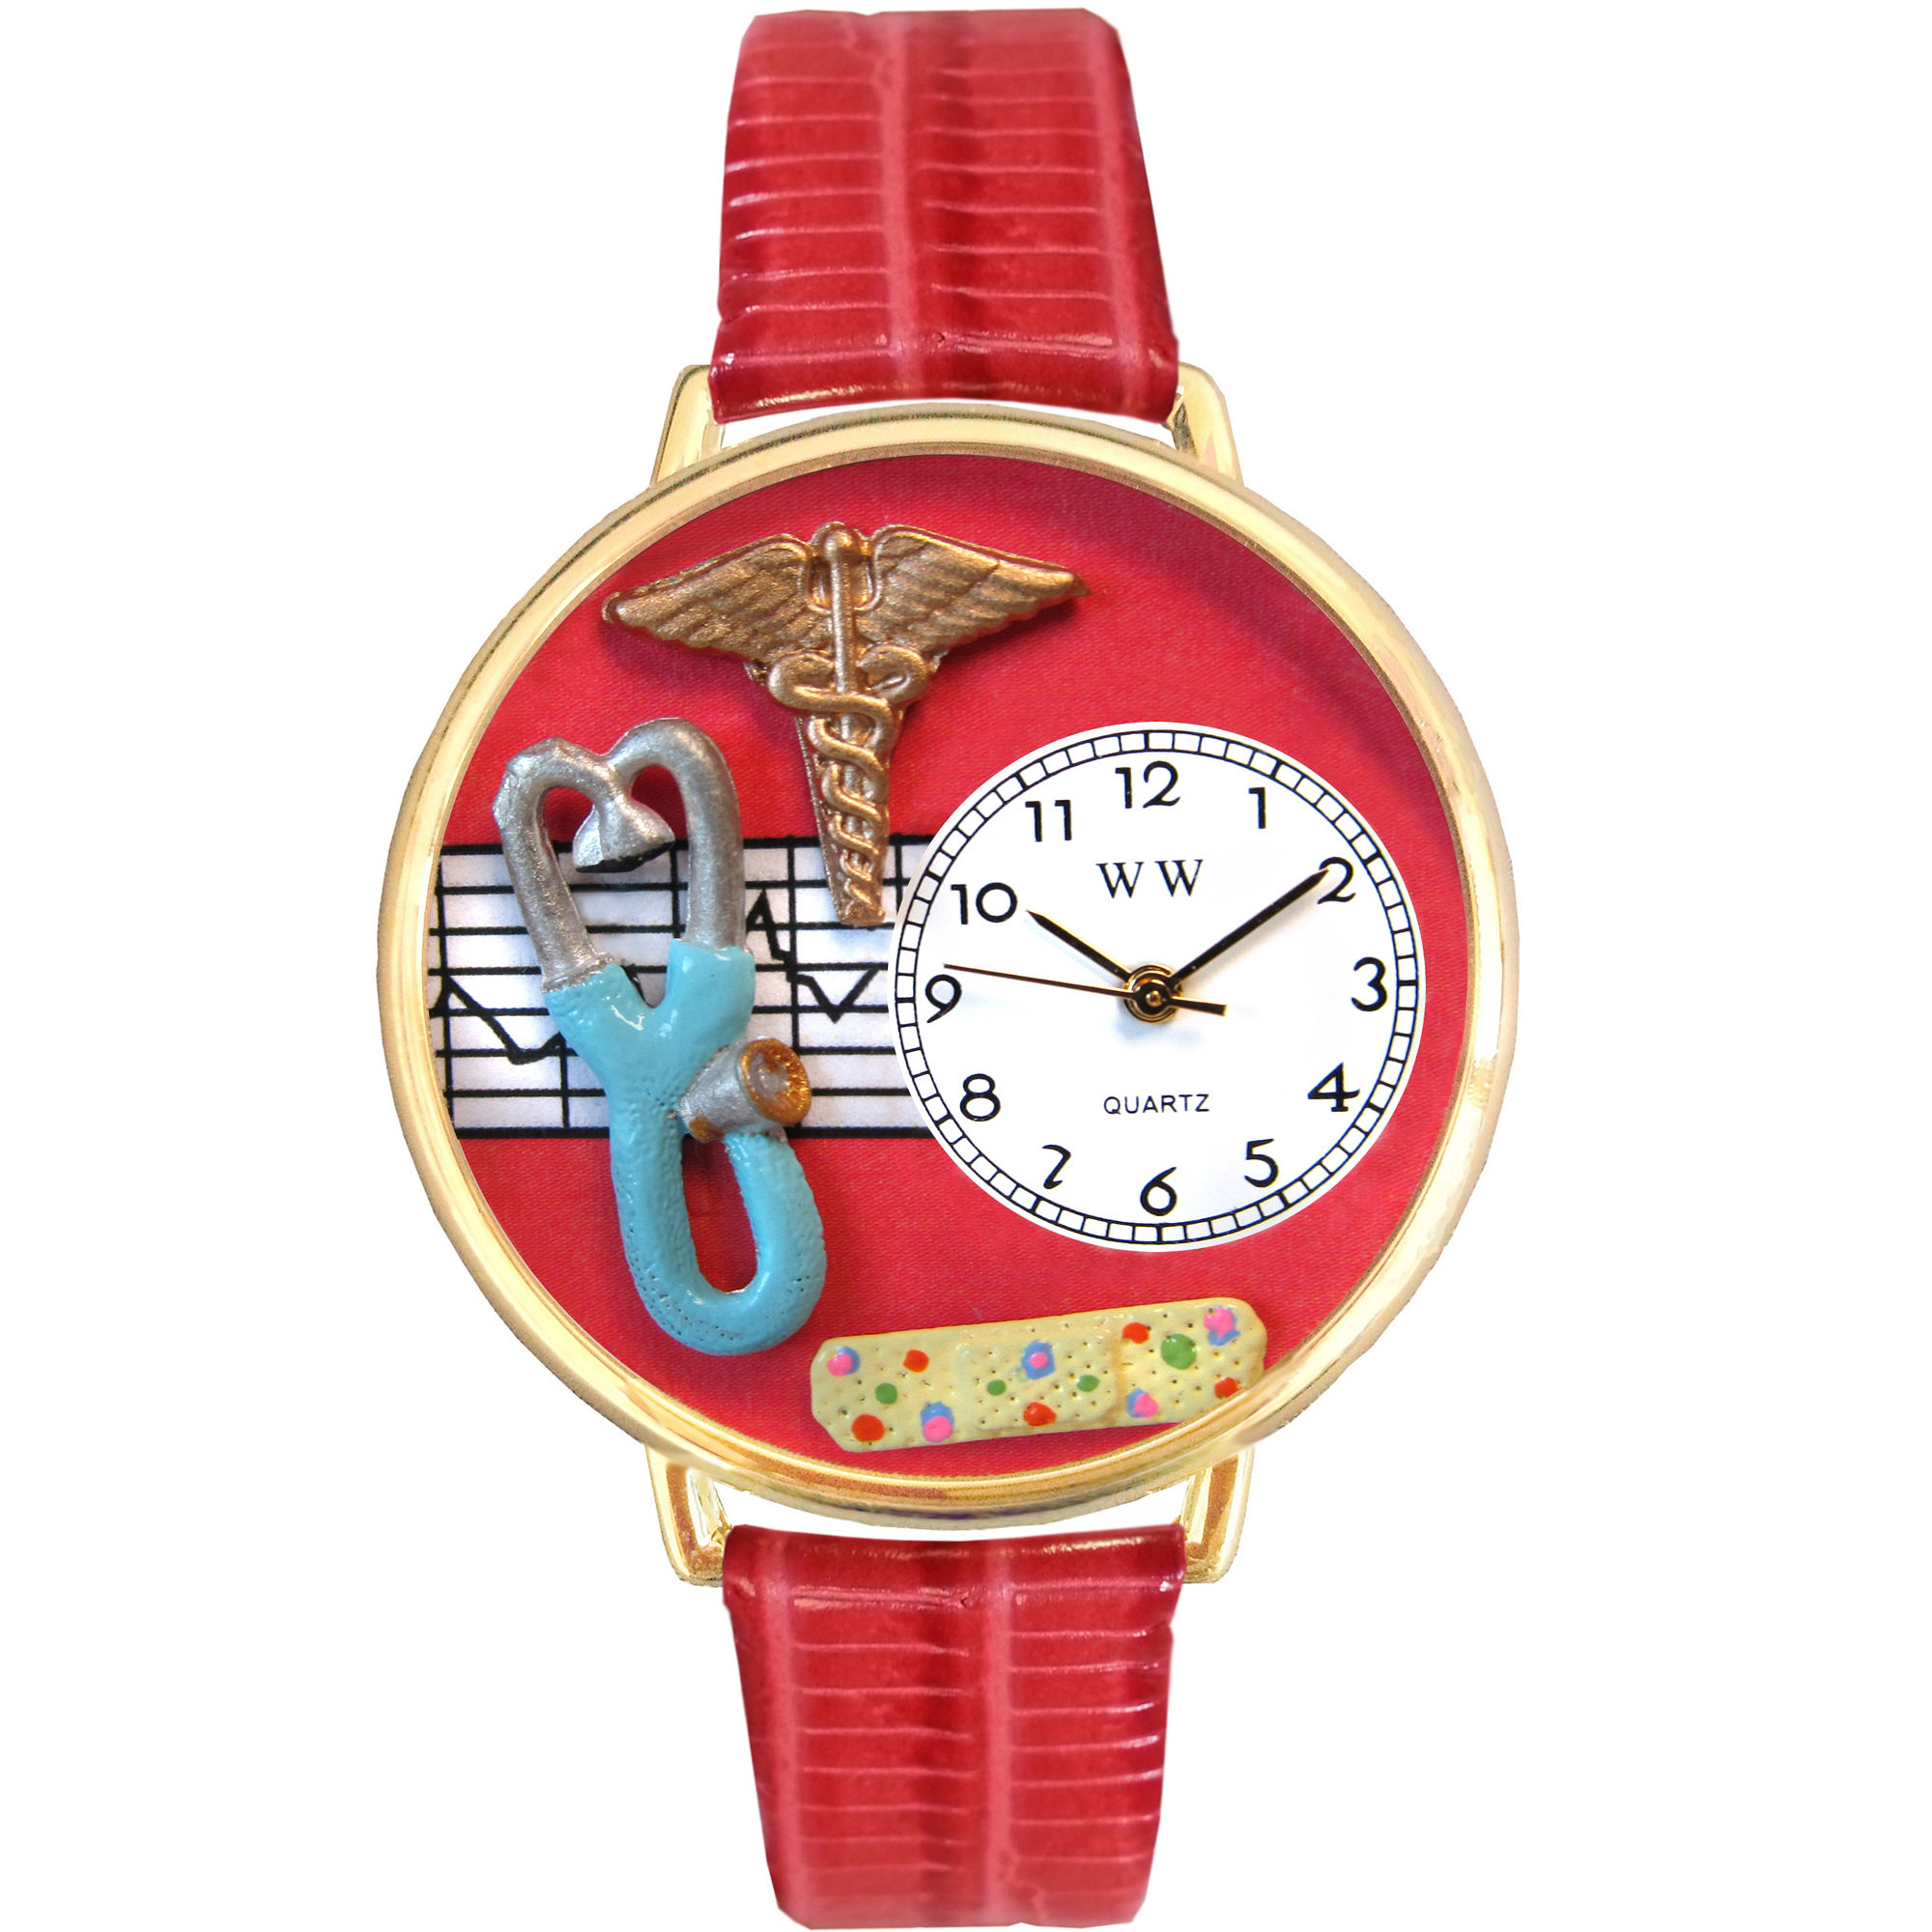 Whimsical Watches Personalized Nurse Womens Gold-Tone Bezel Red Leather Strap Watch